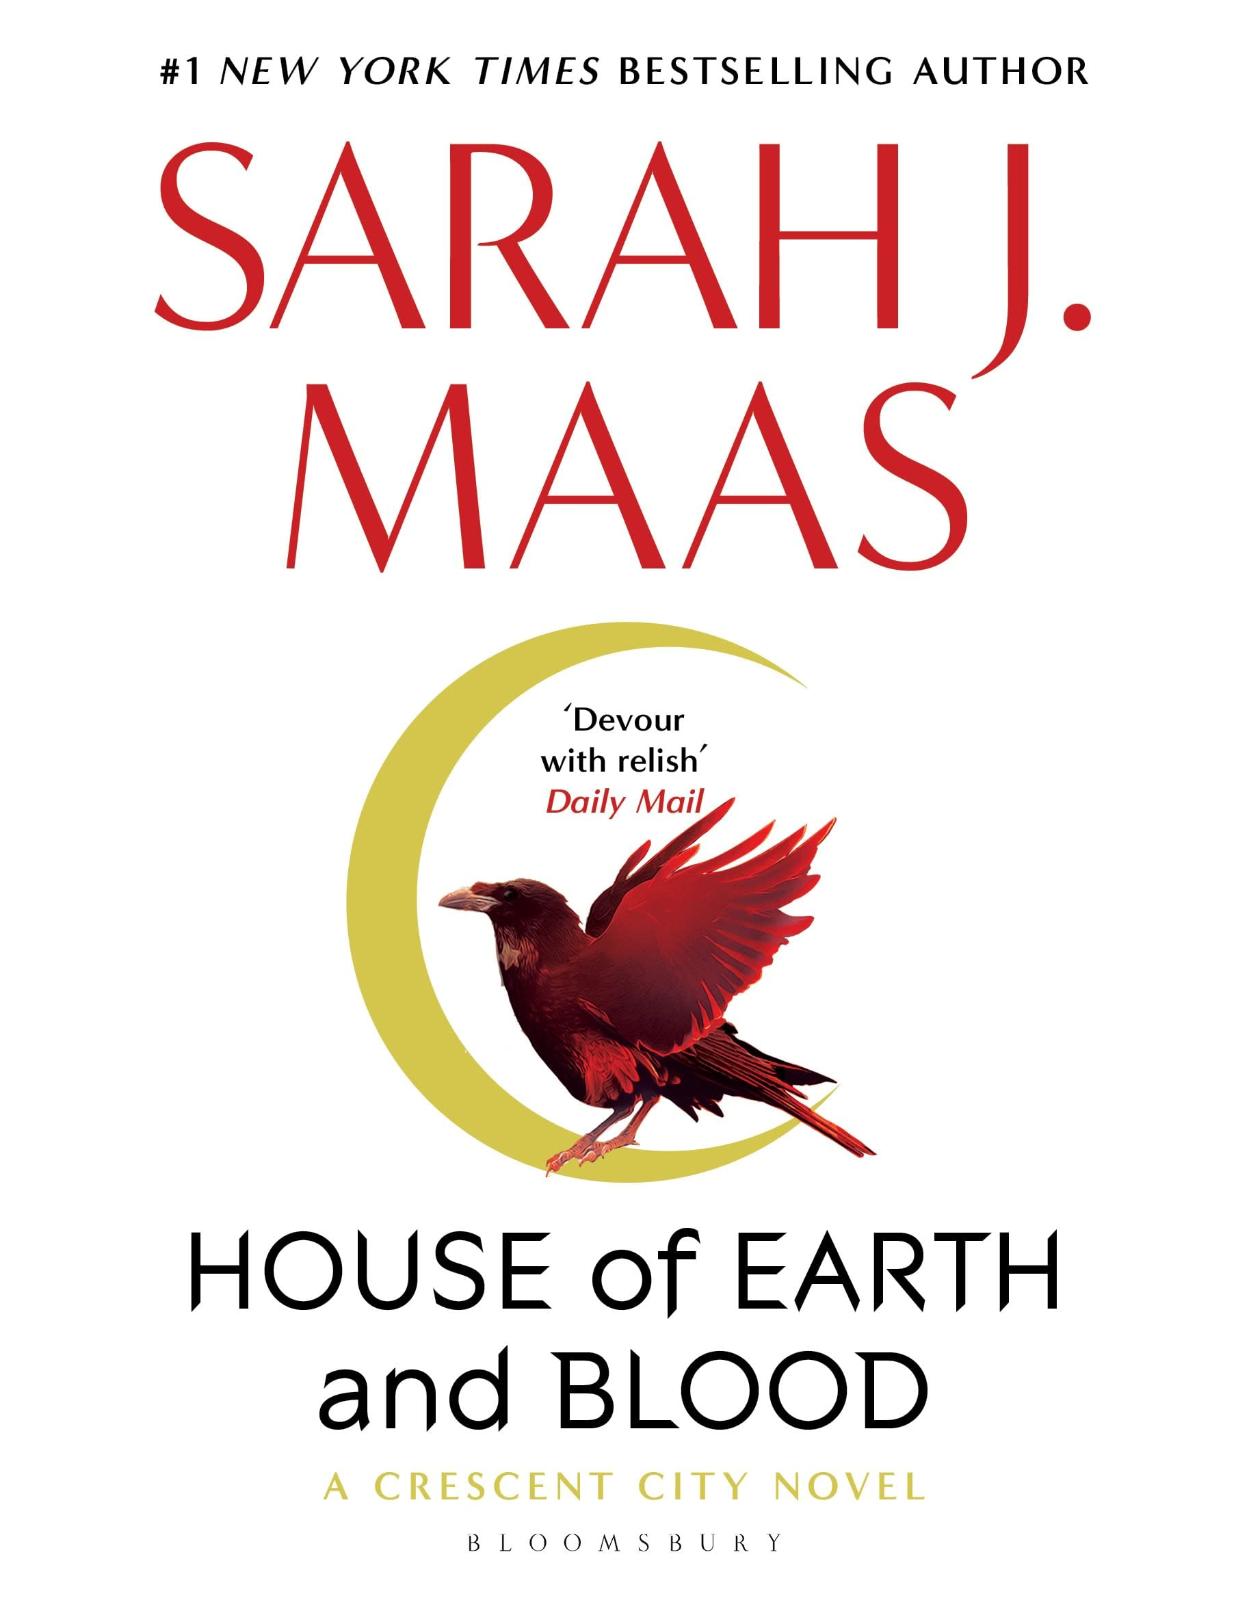 House of Earth and Blood: The epic new fantasy series from multi-million and #1 New York Times bestselling